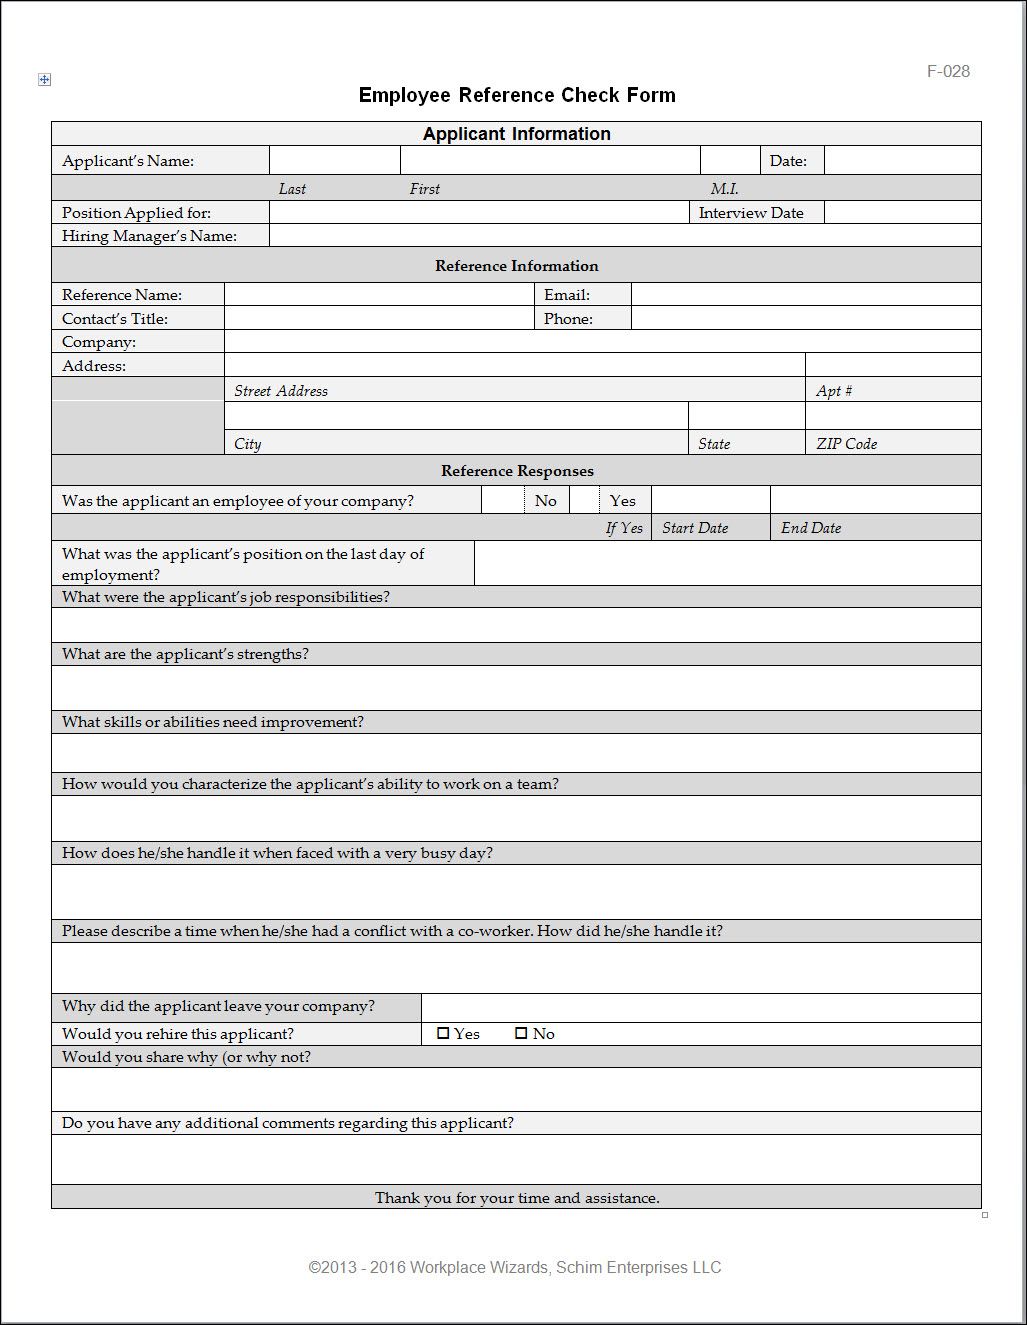 Employee Reference Check Form Restaurant Management Hiring Manager Form